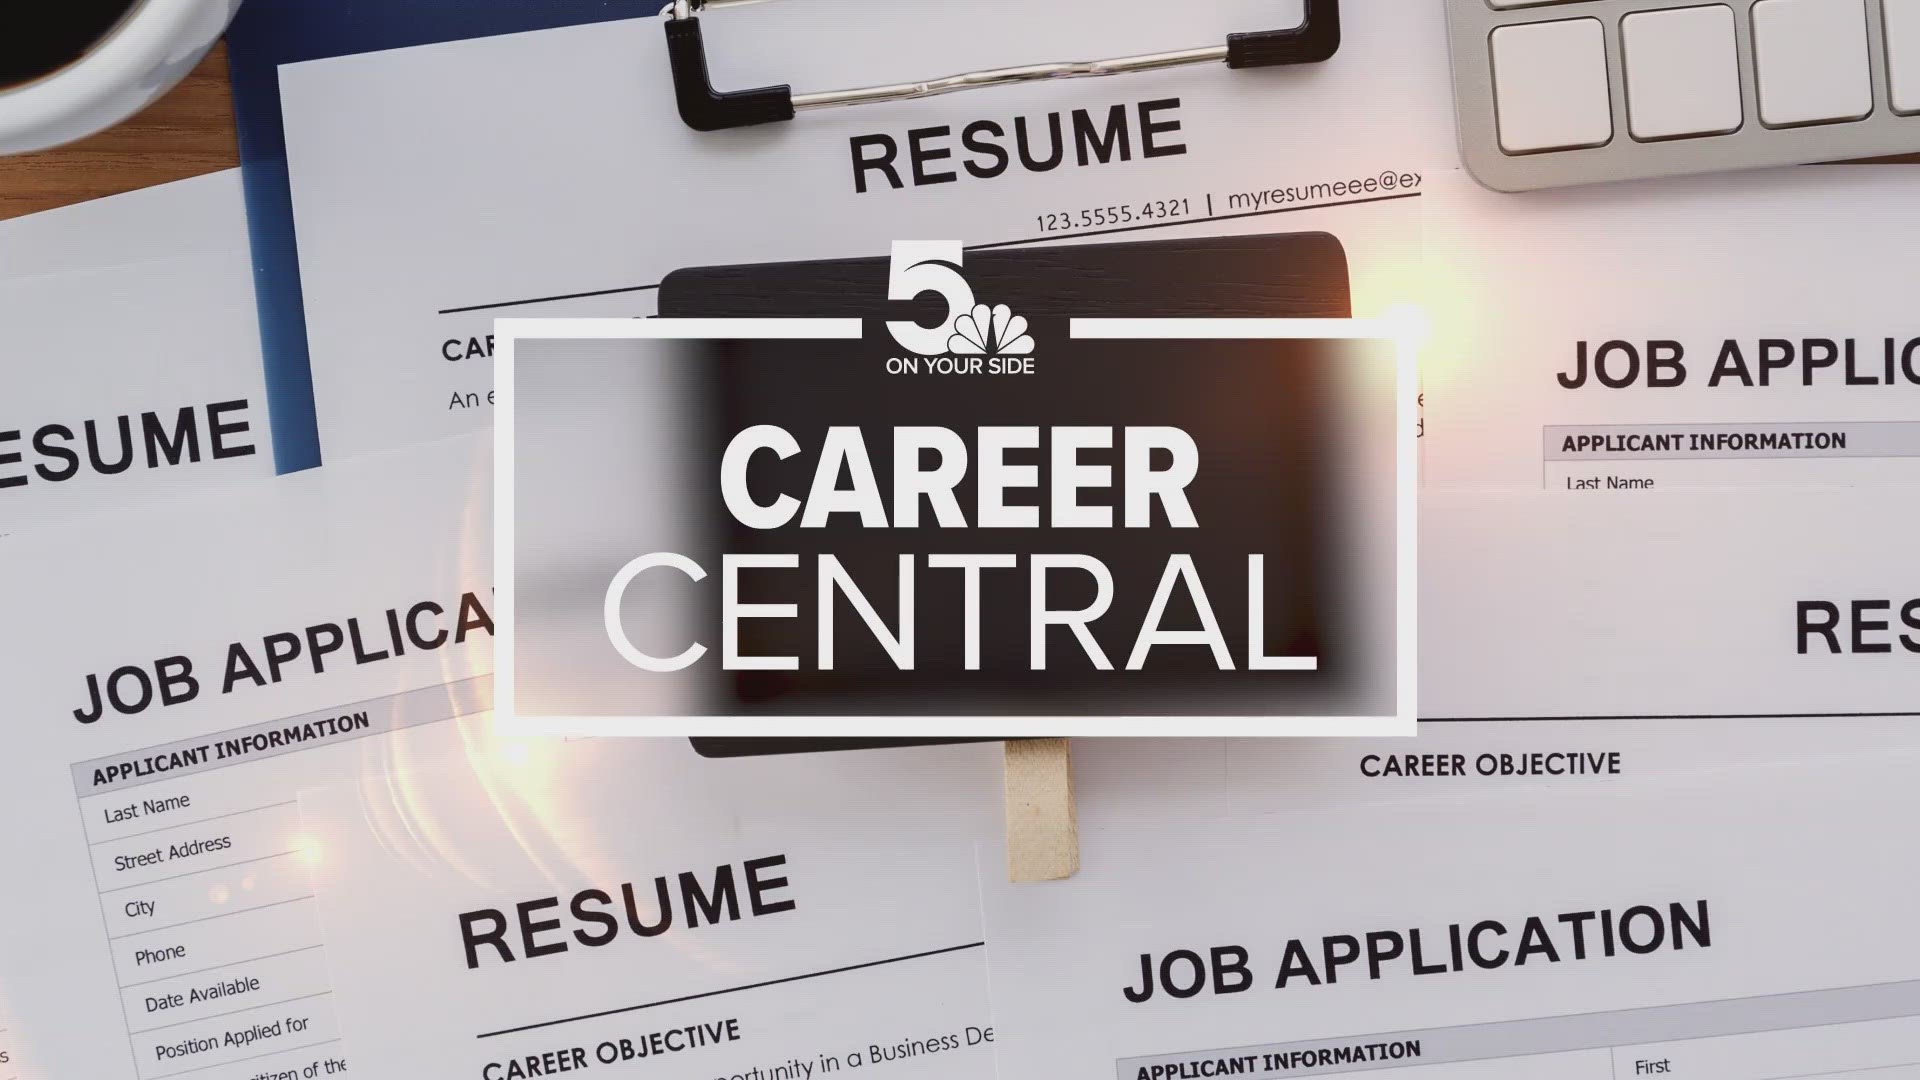 This week's job highlights include tips for getting your finances in order, a job fair for military veterans, and a school district that needs workers.